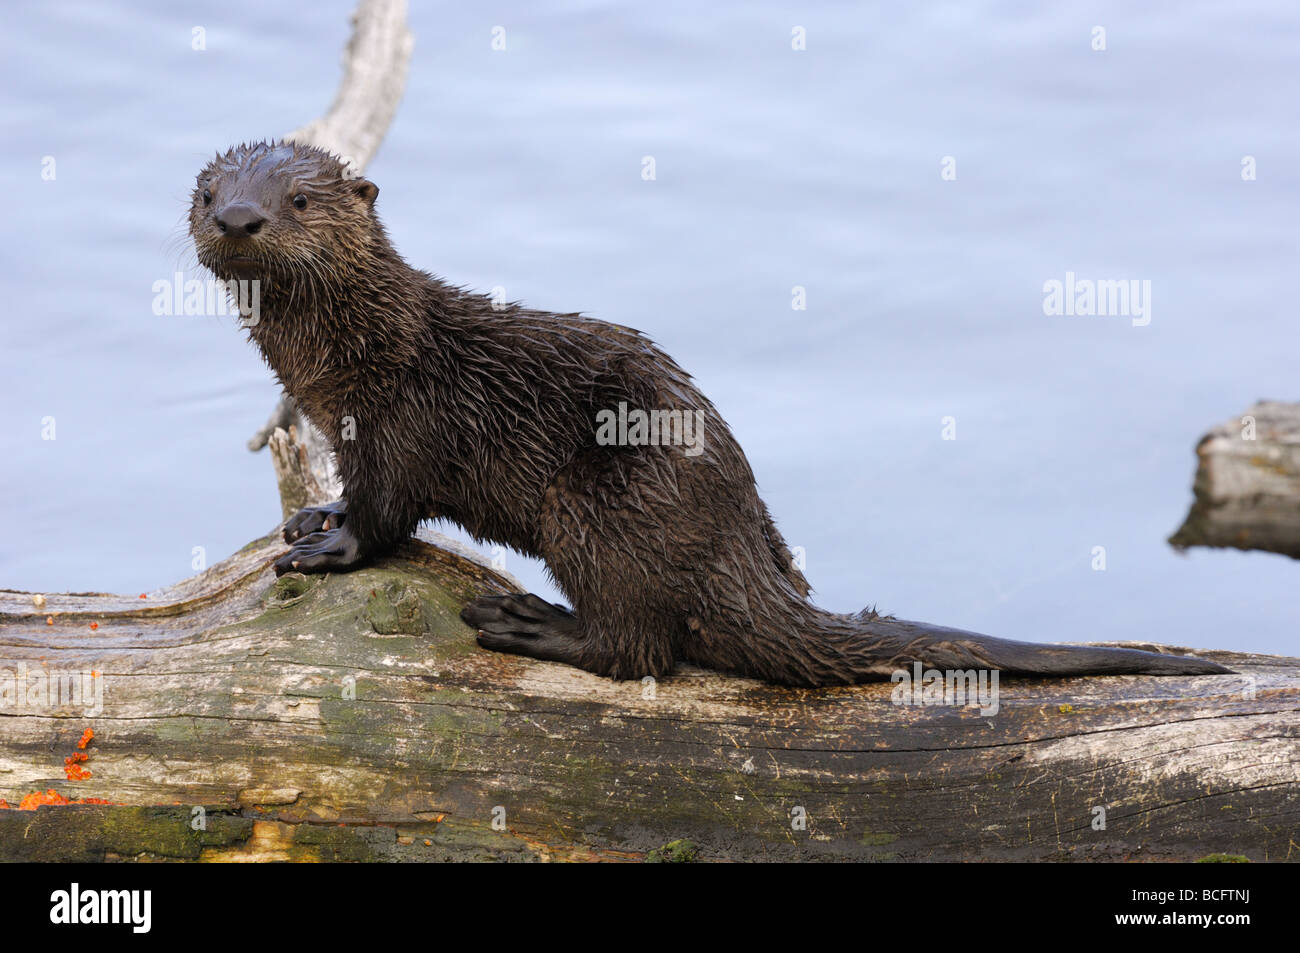 Stock photo of a river otter pup sitting on a log, Yellowstone National Park, 2009. Stock Photo